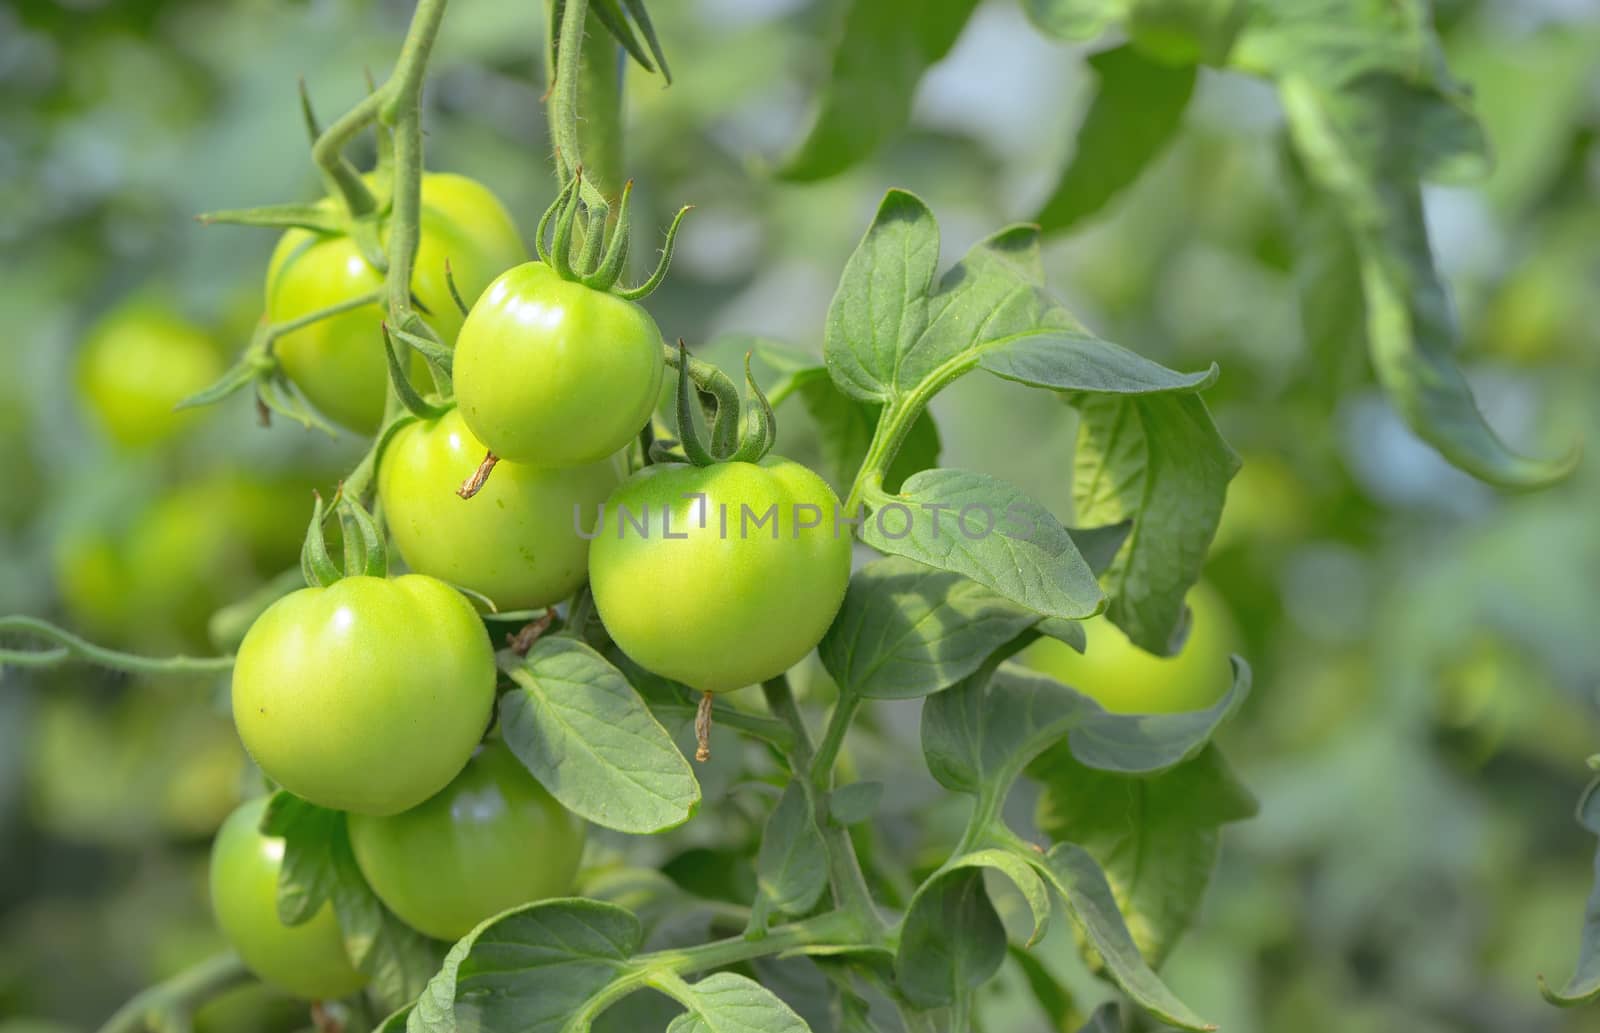 Green unripe tomatoes in greenhouse